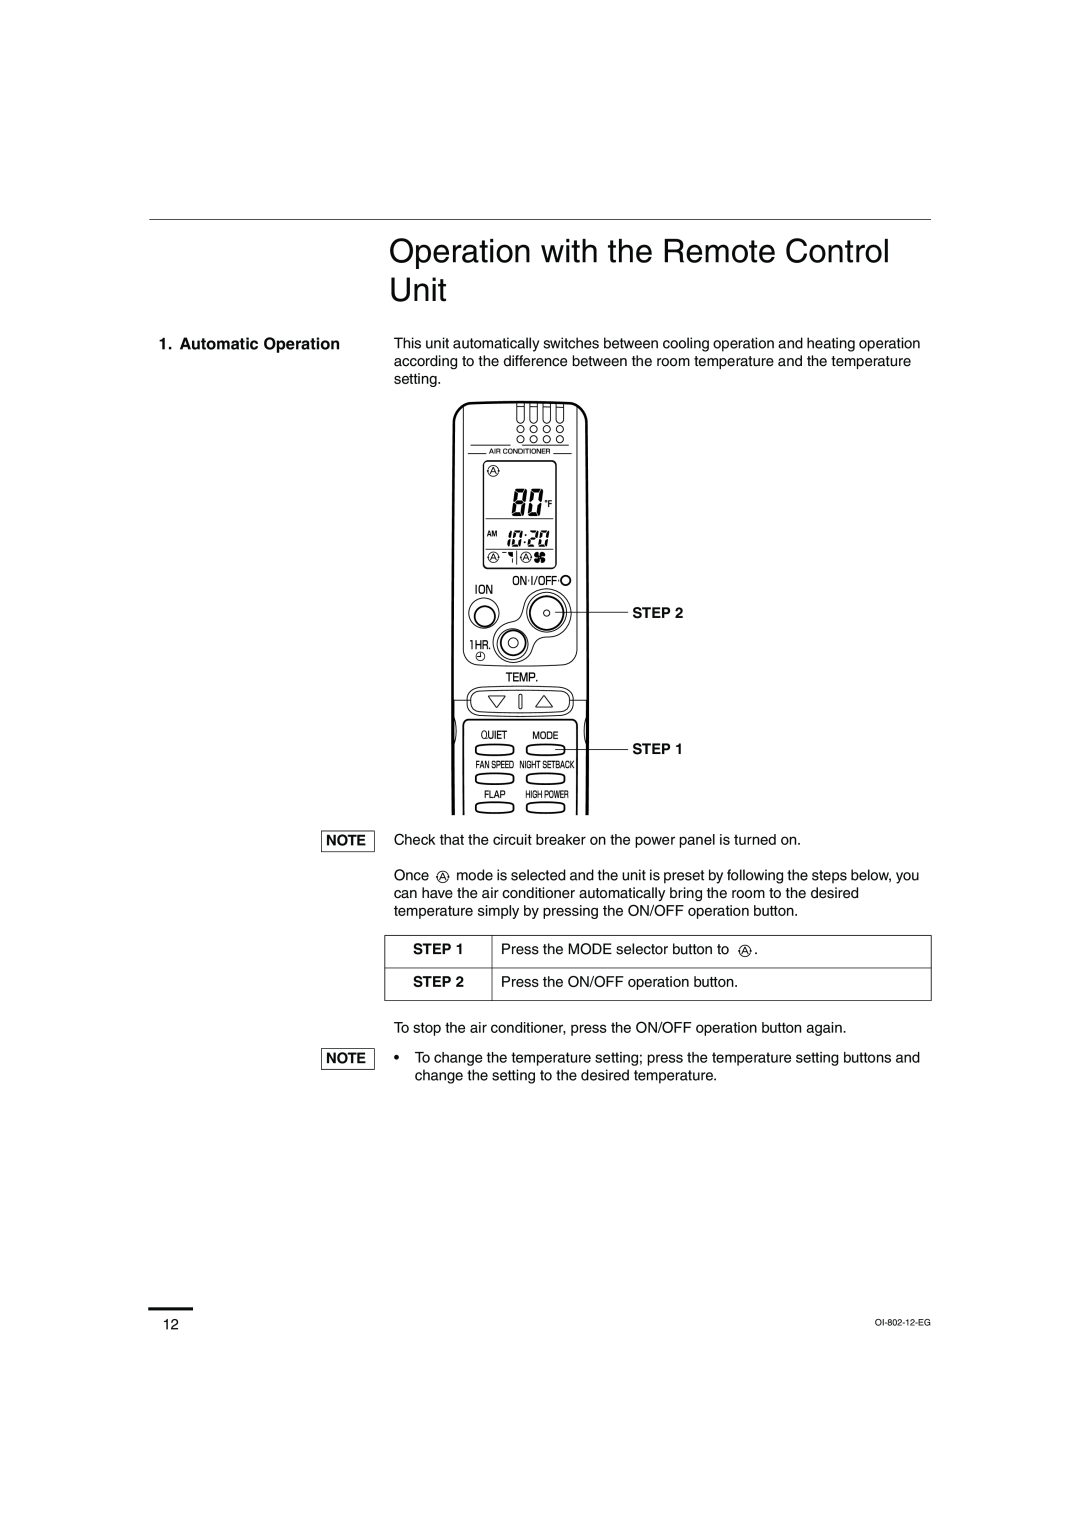 Sanyo KHS1271, KHS0971 instruction manual Operation with the Remote Control Unit, Automatic Operation 